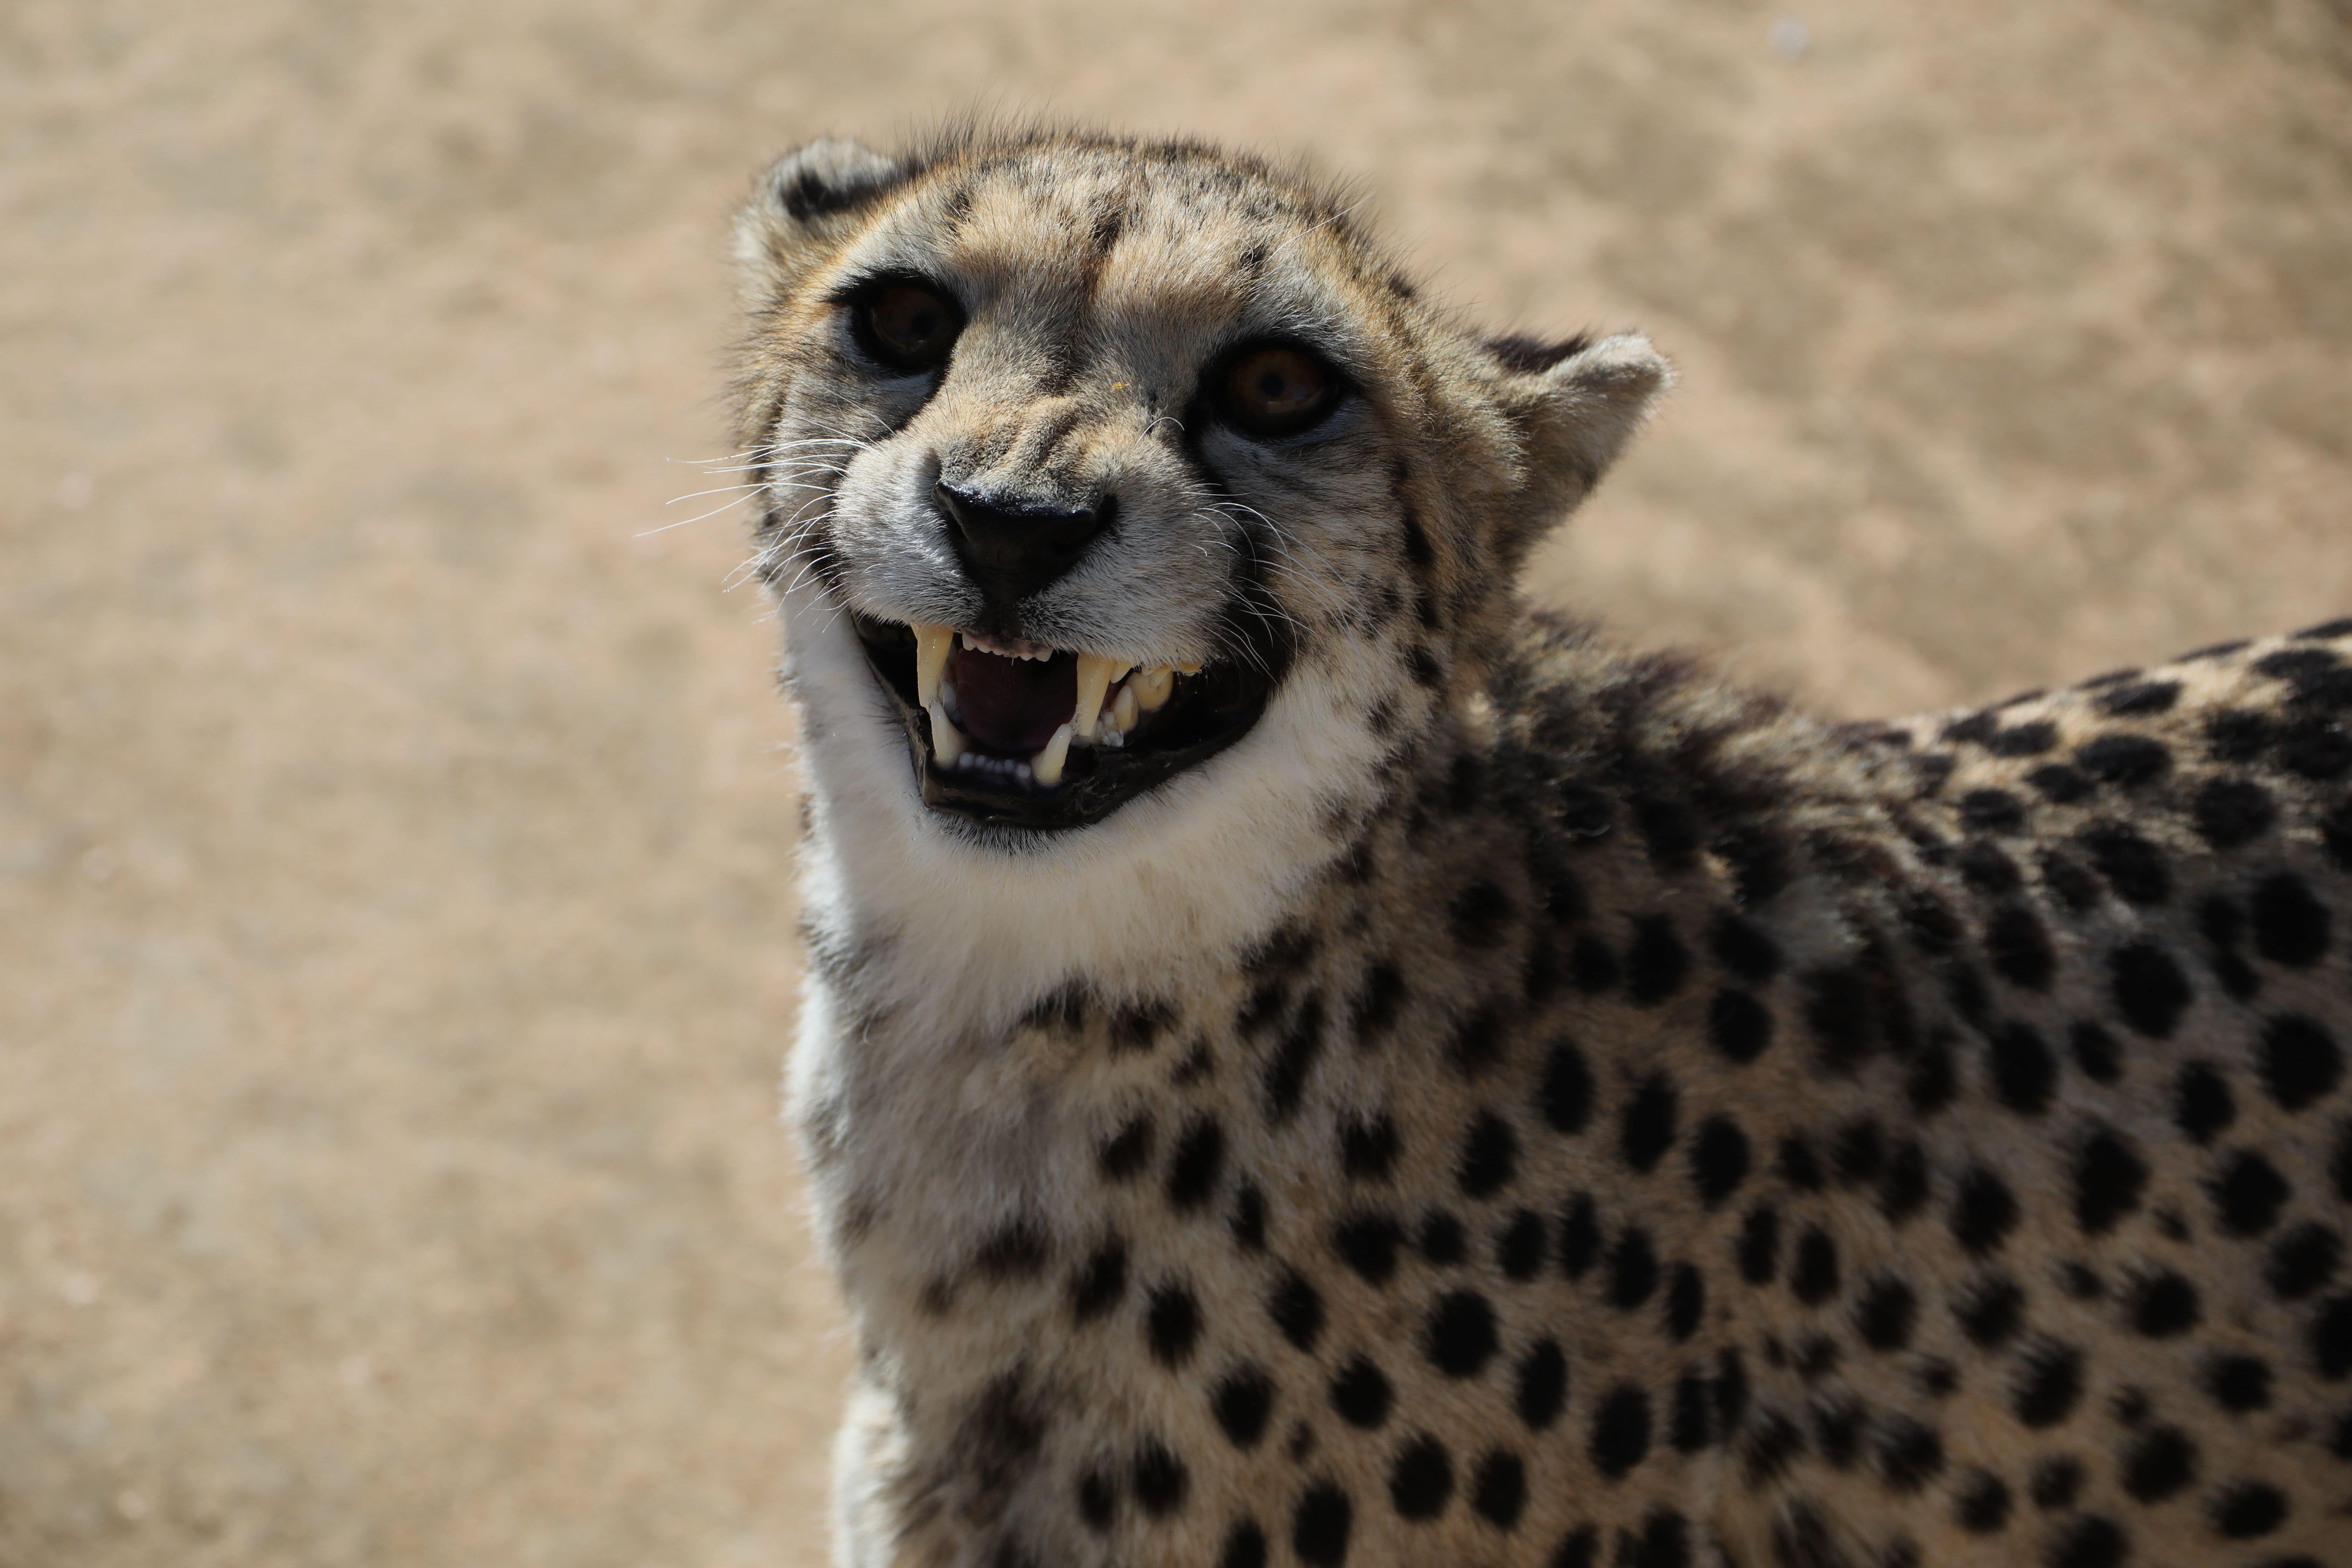 A cheetah at the Cheetah Conservation Fund in Namibia.